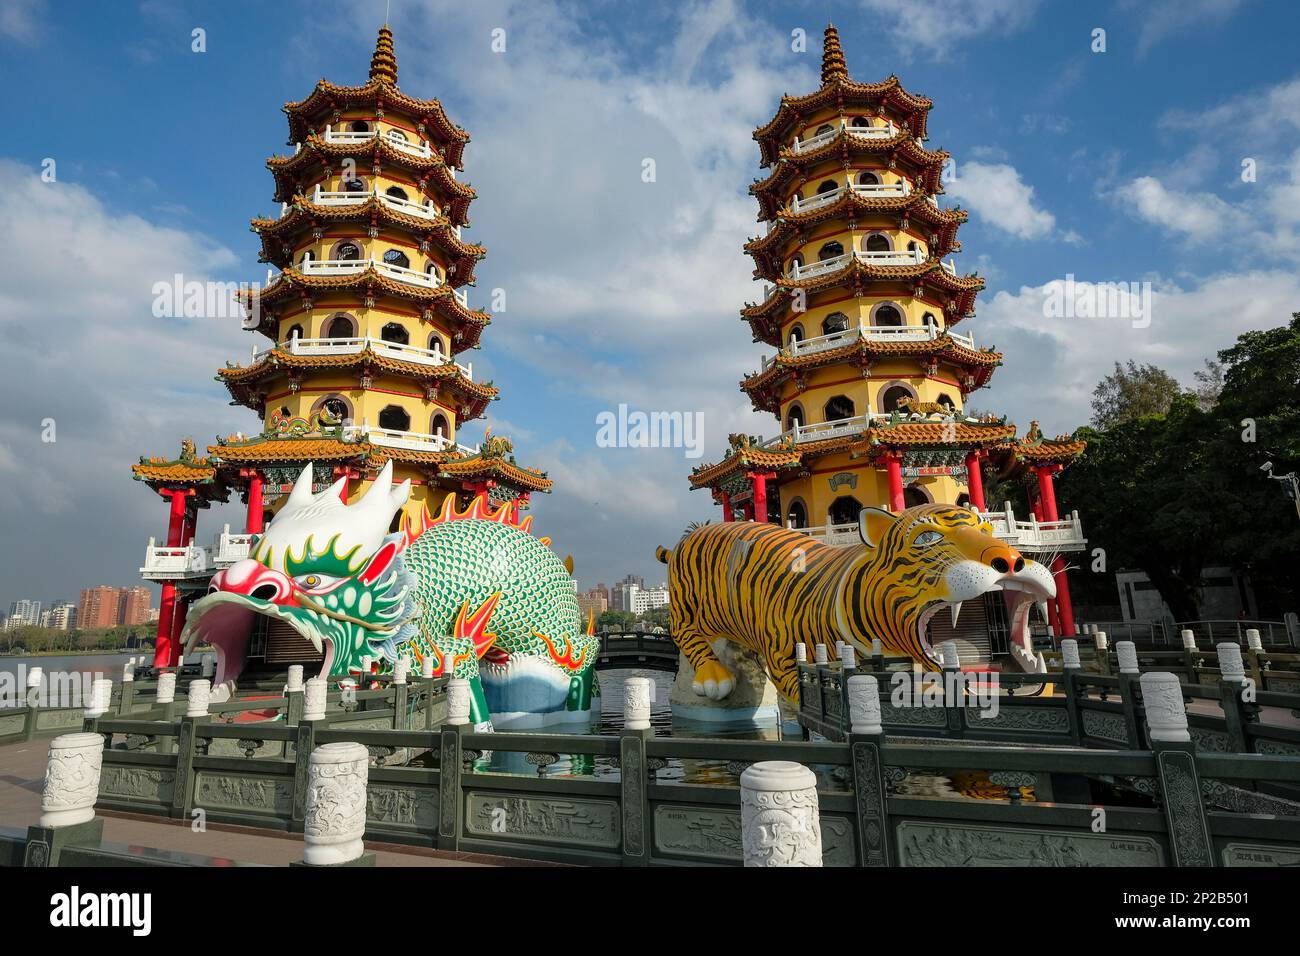 Kaohsiung, Taiwan - February 9, 2023: Dragon and Tiger Pagodas is a temple located on Lotus Lake in Kaohsiung, Taiwan Stock Photo